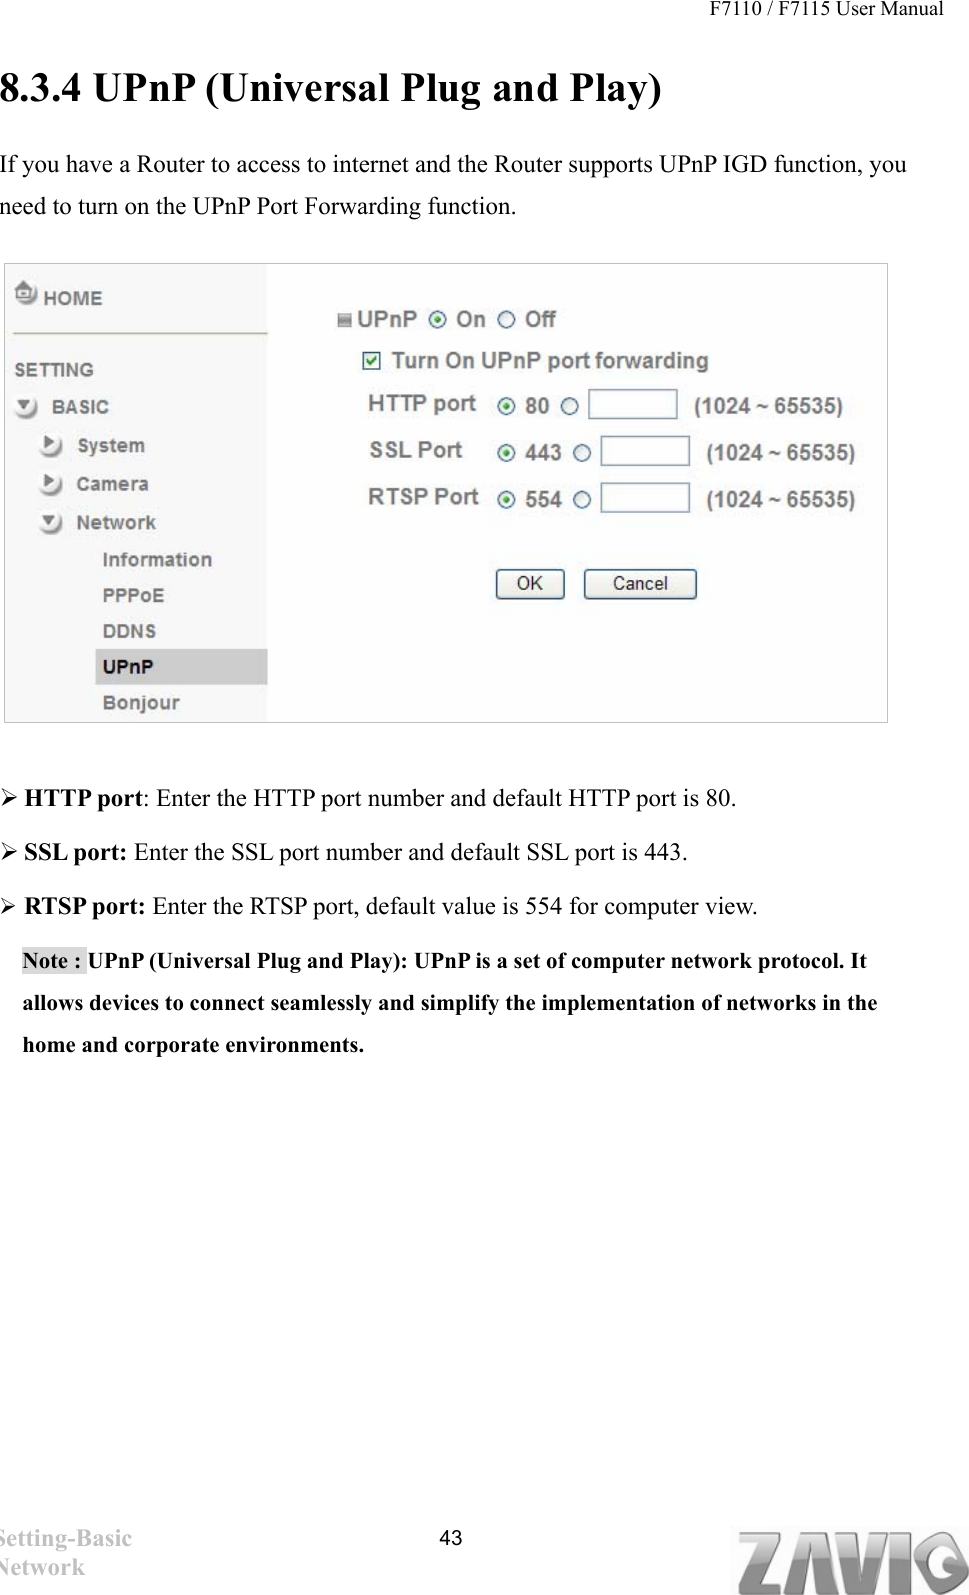 F7110 / F7115 User Manual   8.3.4 UPnP (Universal Plug and Play)   If you have a Router to access to internet and the Router supports UPnP IGD function, you need to turn on the UPnP Port Forwarding function.           HTTP port: Enter the HTTP port number and default HTTP port is 80.  SSL port: Enter the SSL port number and default SSL port is 443.  RTSP port: Enter the RTSP port, default value is 554 for computer view. Note : UPnP (Universal Plug and Play): UPnP is a set of computer network protocol. It allows devices to connect seamlessly and simplify the implementation of networks in the home and corporate environments.   Setting-Basic Network  43